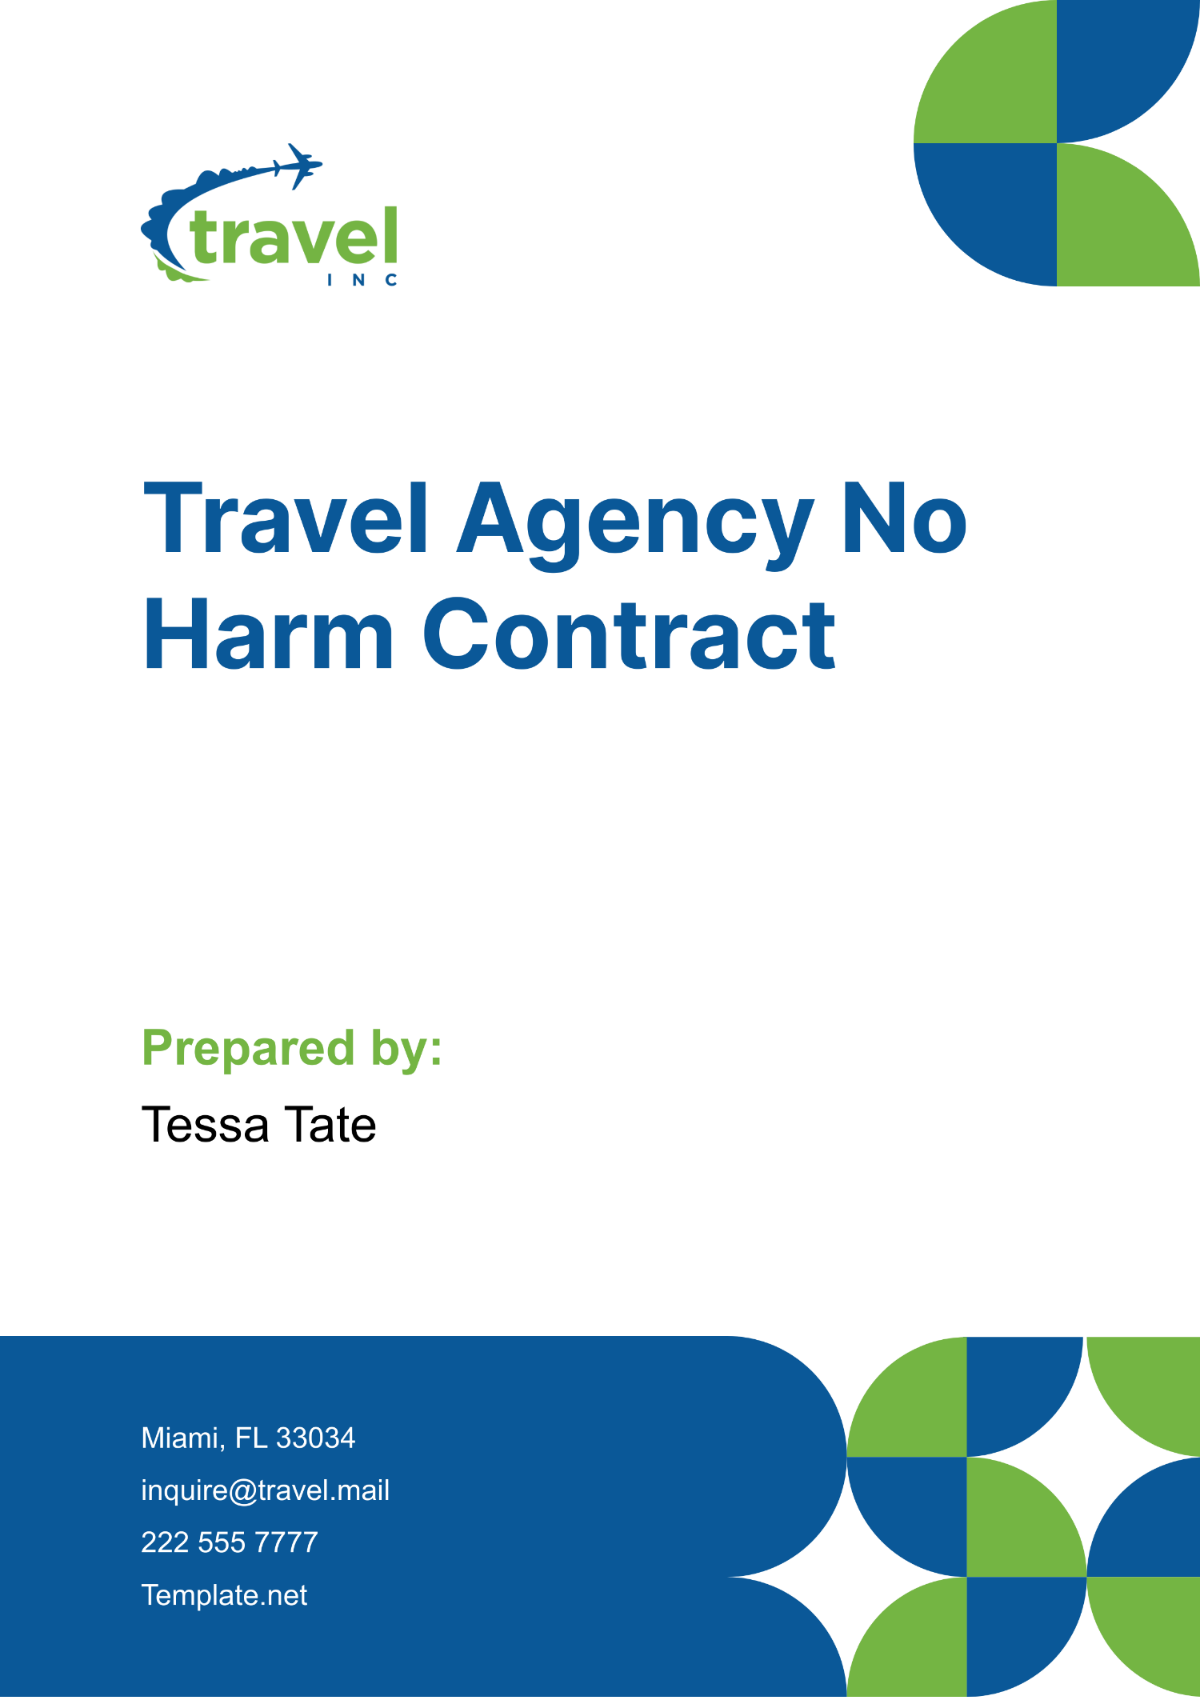 Travel Agency No Harm Contract Template